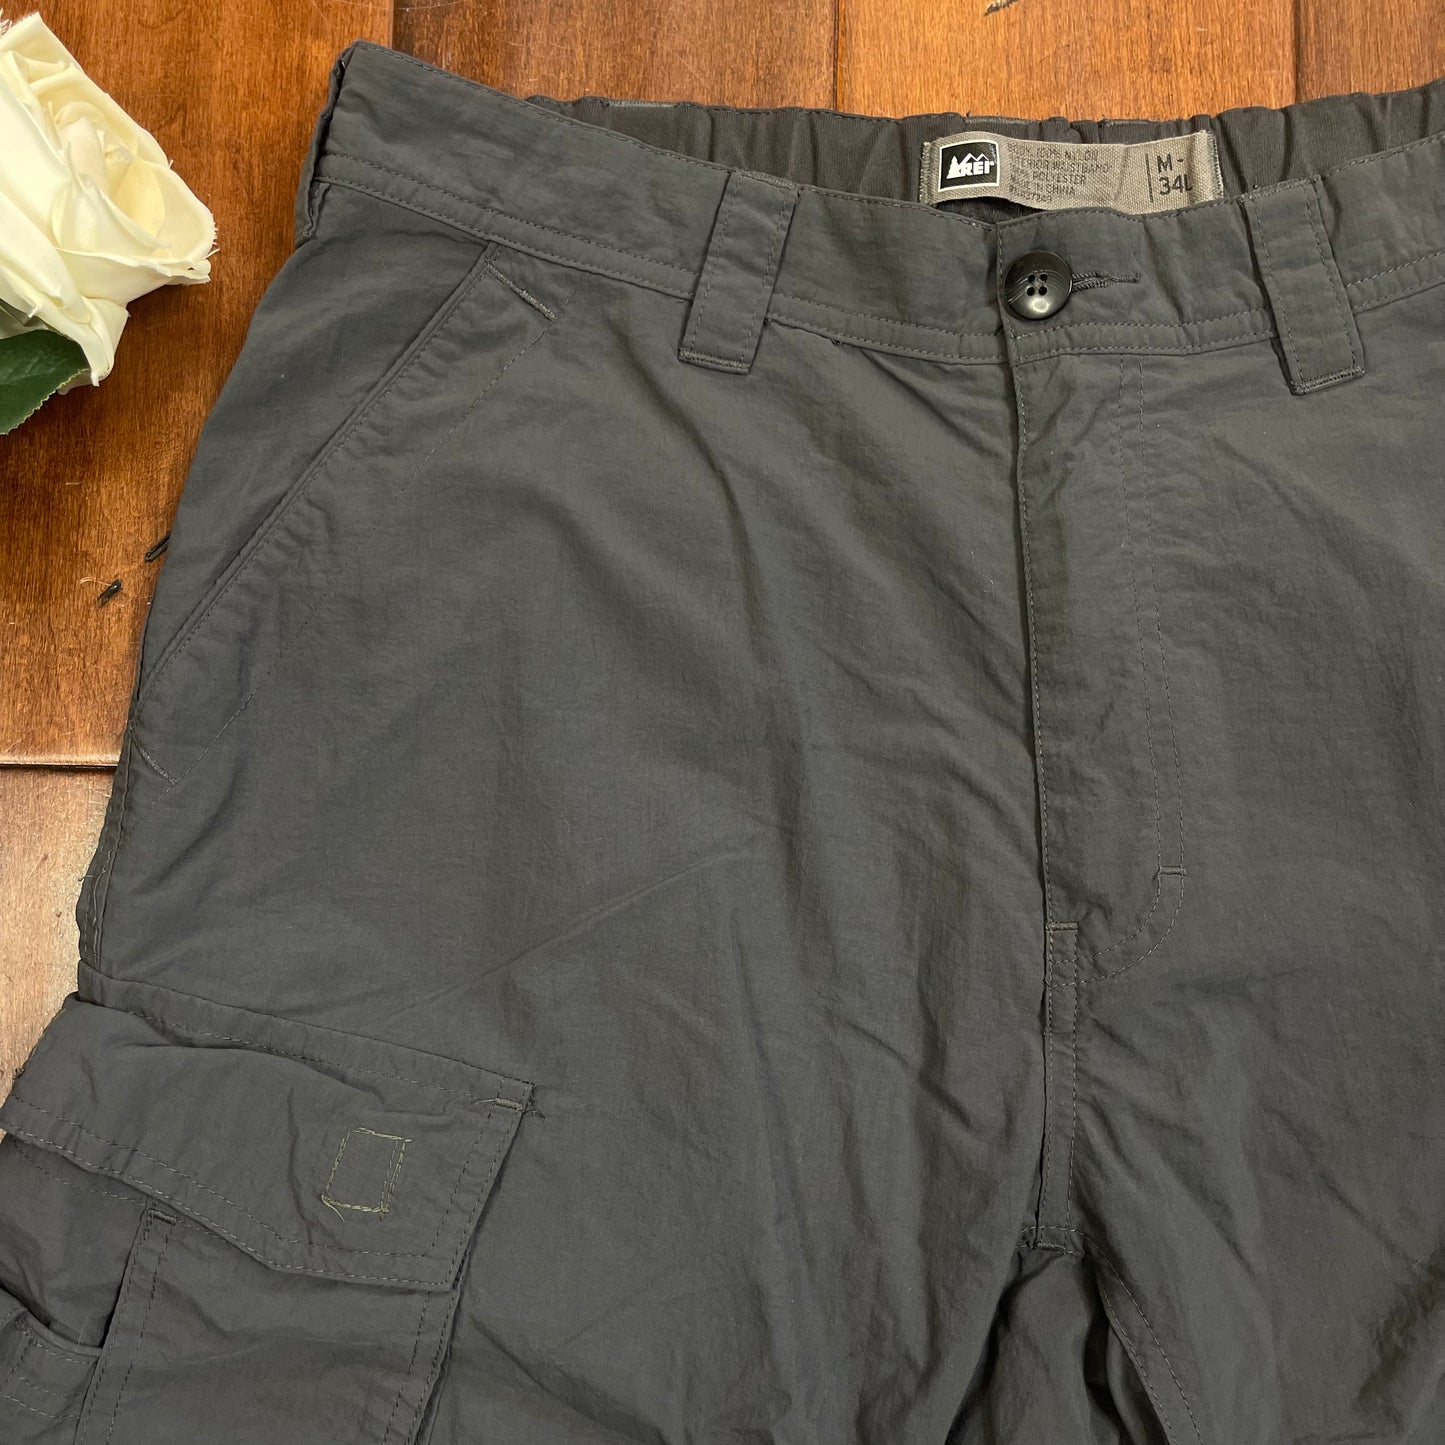 THRIFTED REI CARGO CONVERTIBLE PANTS